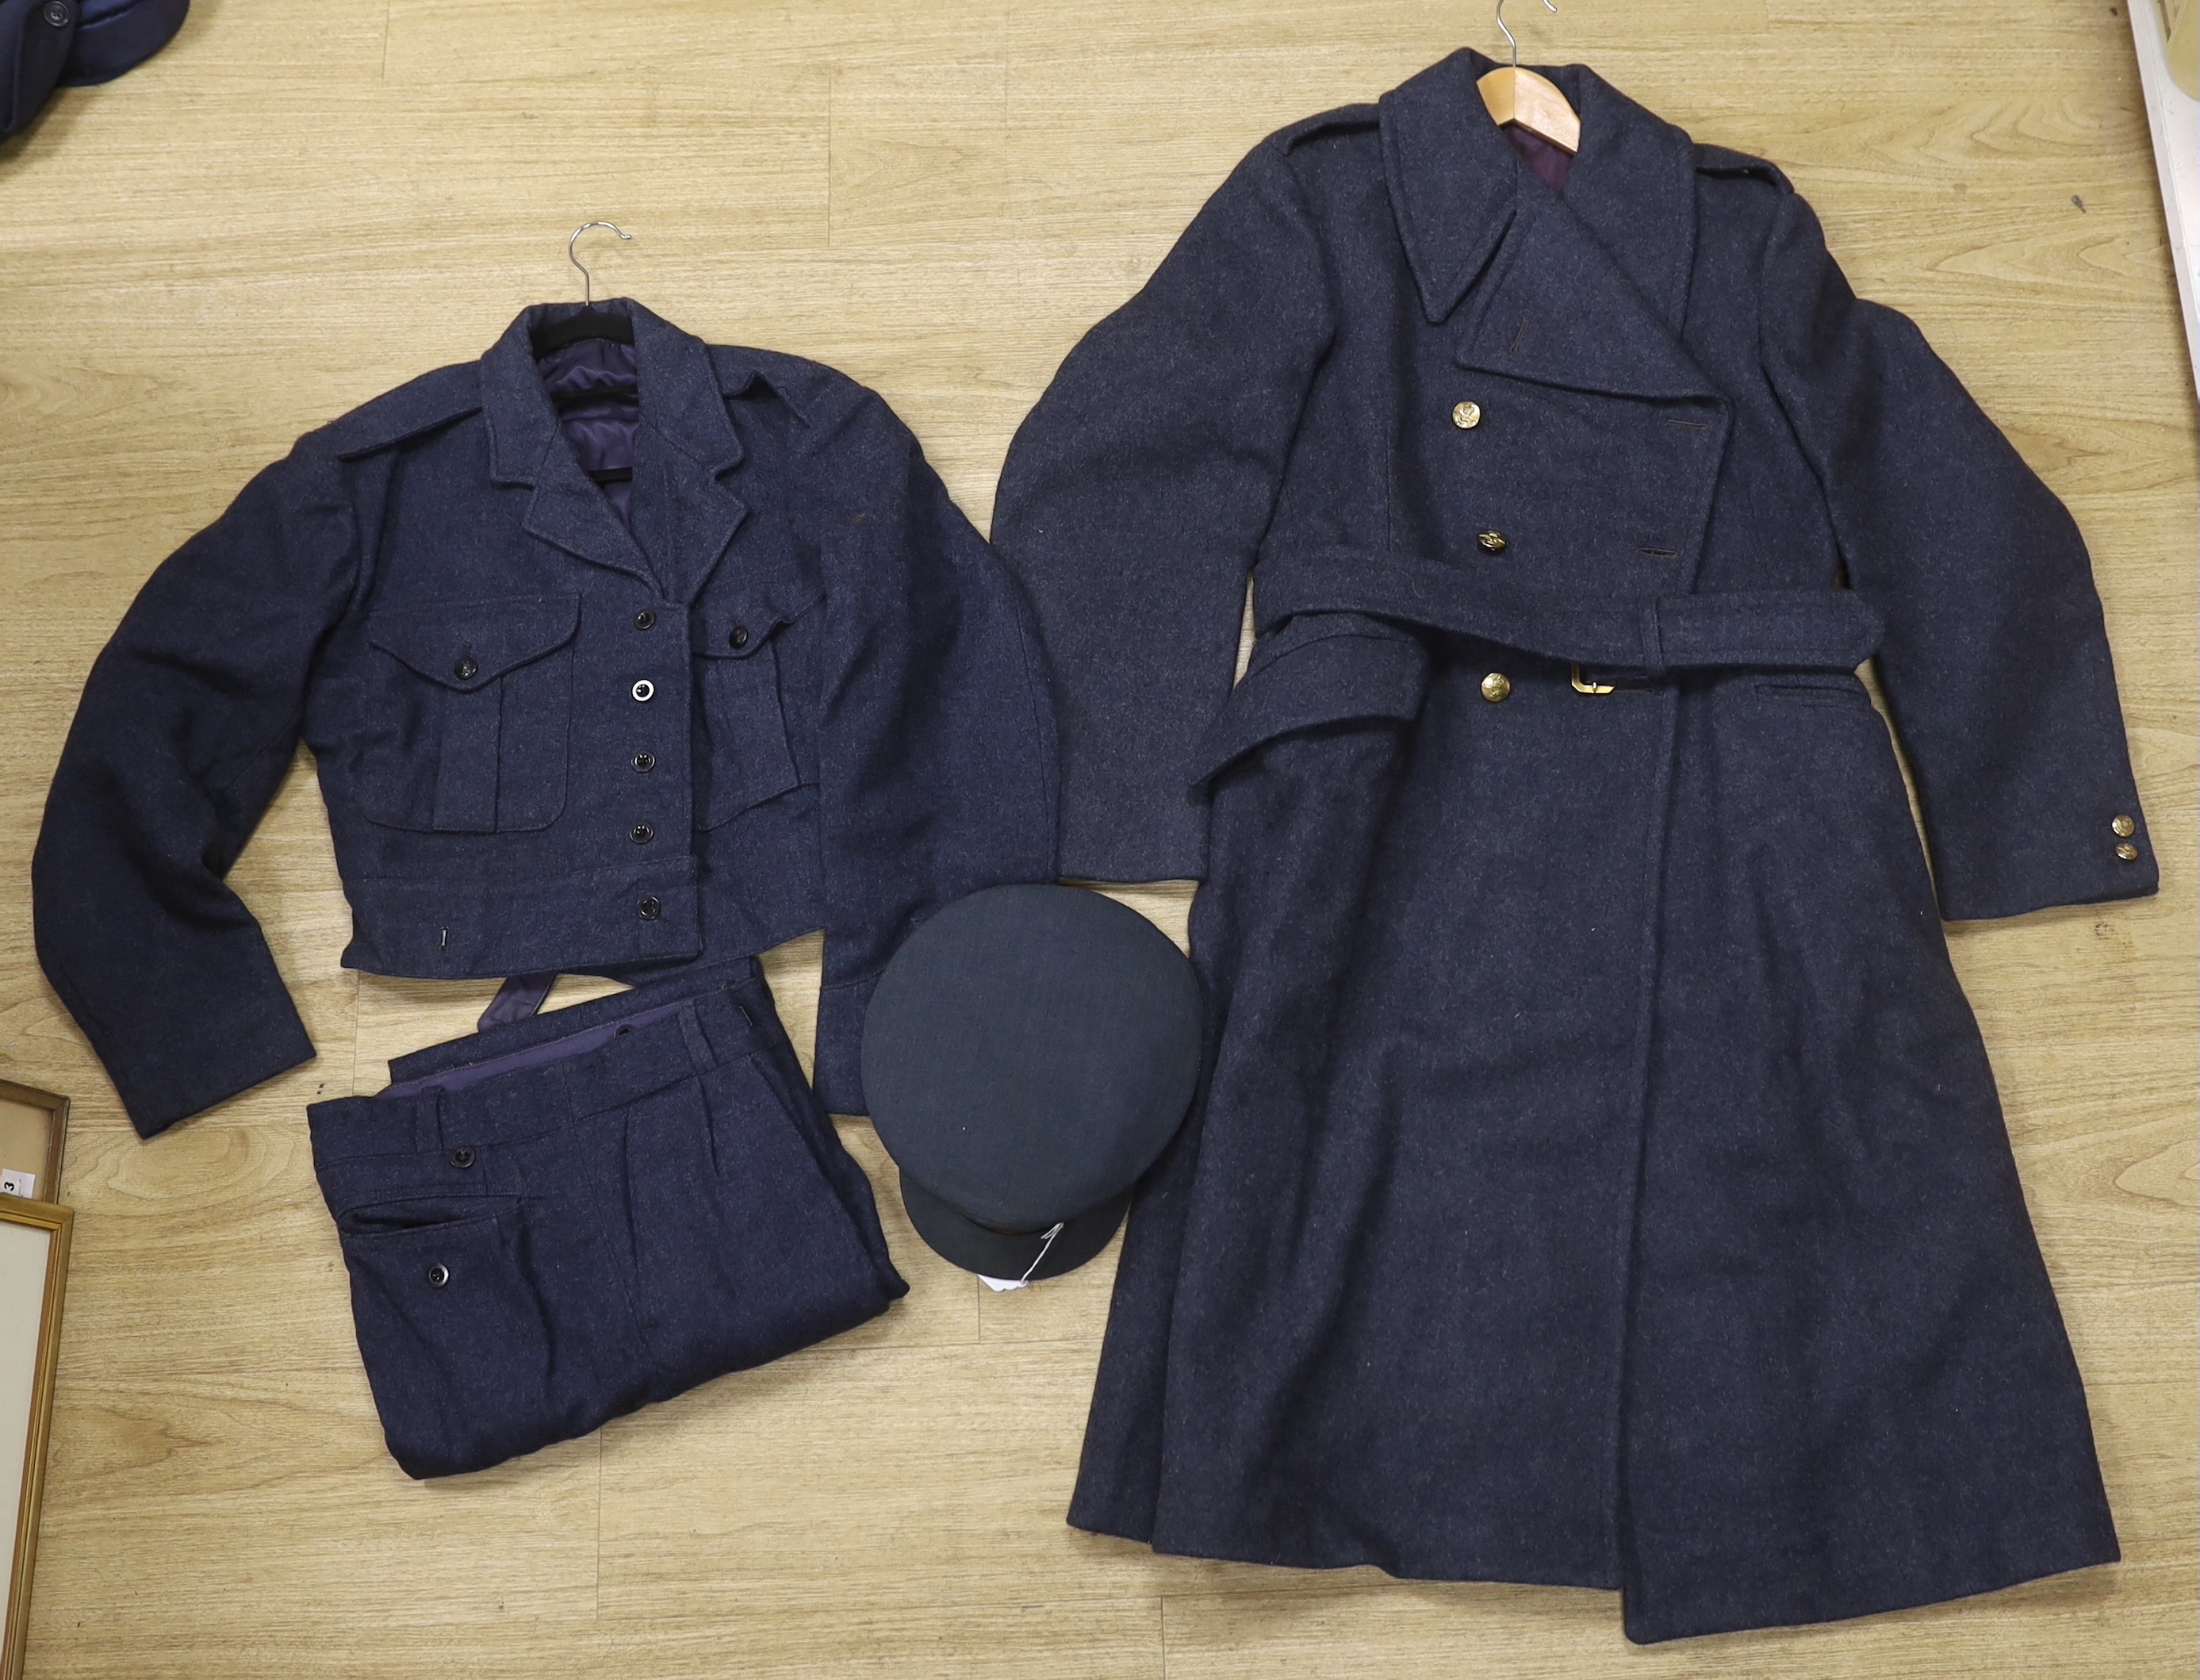 A 1960s RAF uniform comprising; great coat, blouse, cap and trousers, all with manufacturer’s labels, broad arrow markings, dates, etc.